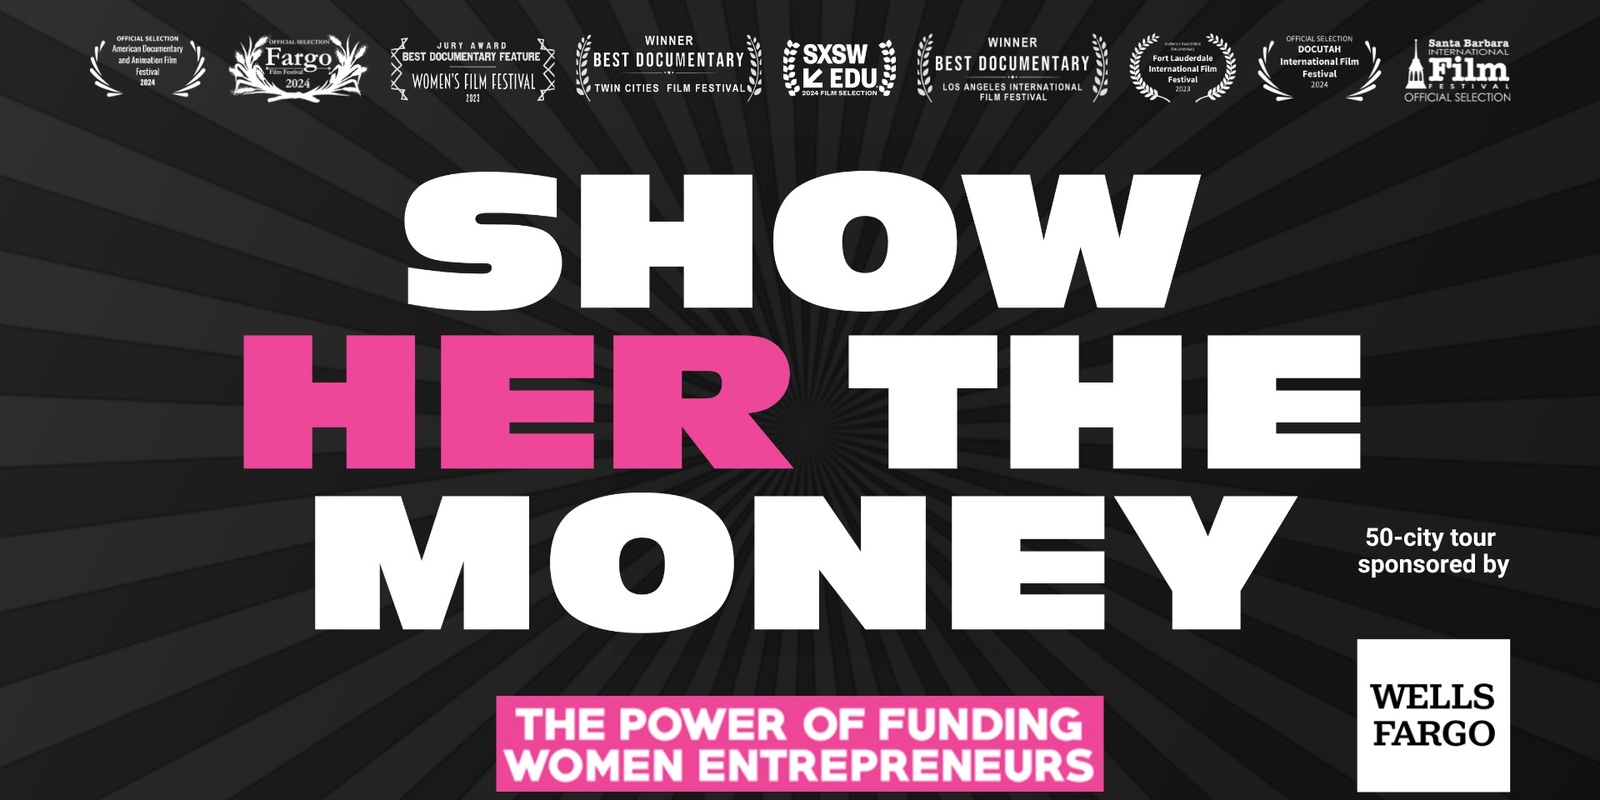 Banner image for Australian Premiere of "Show Her the Money" Movie - Sydney